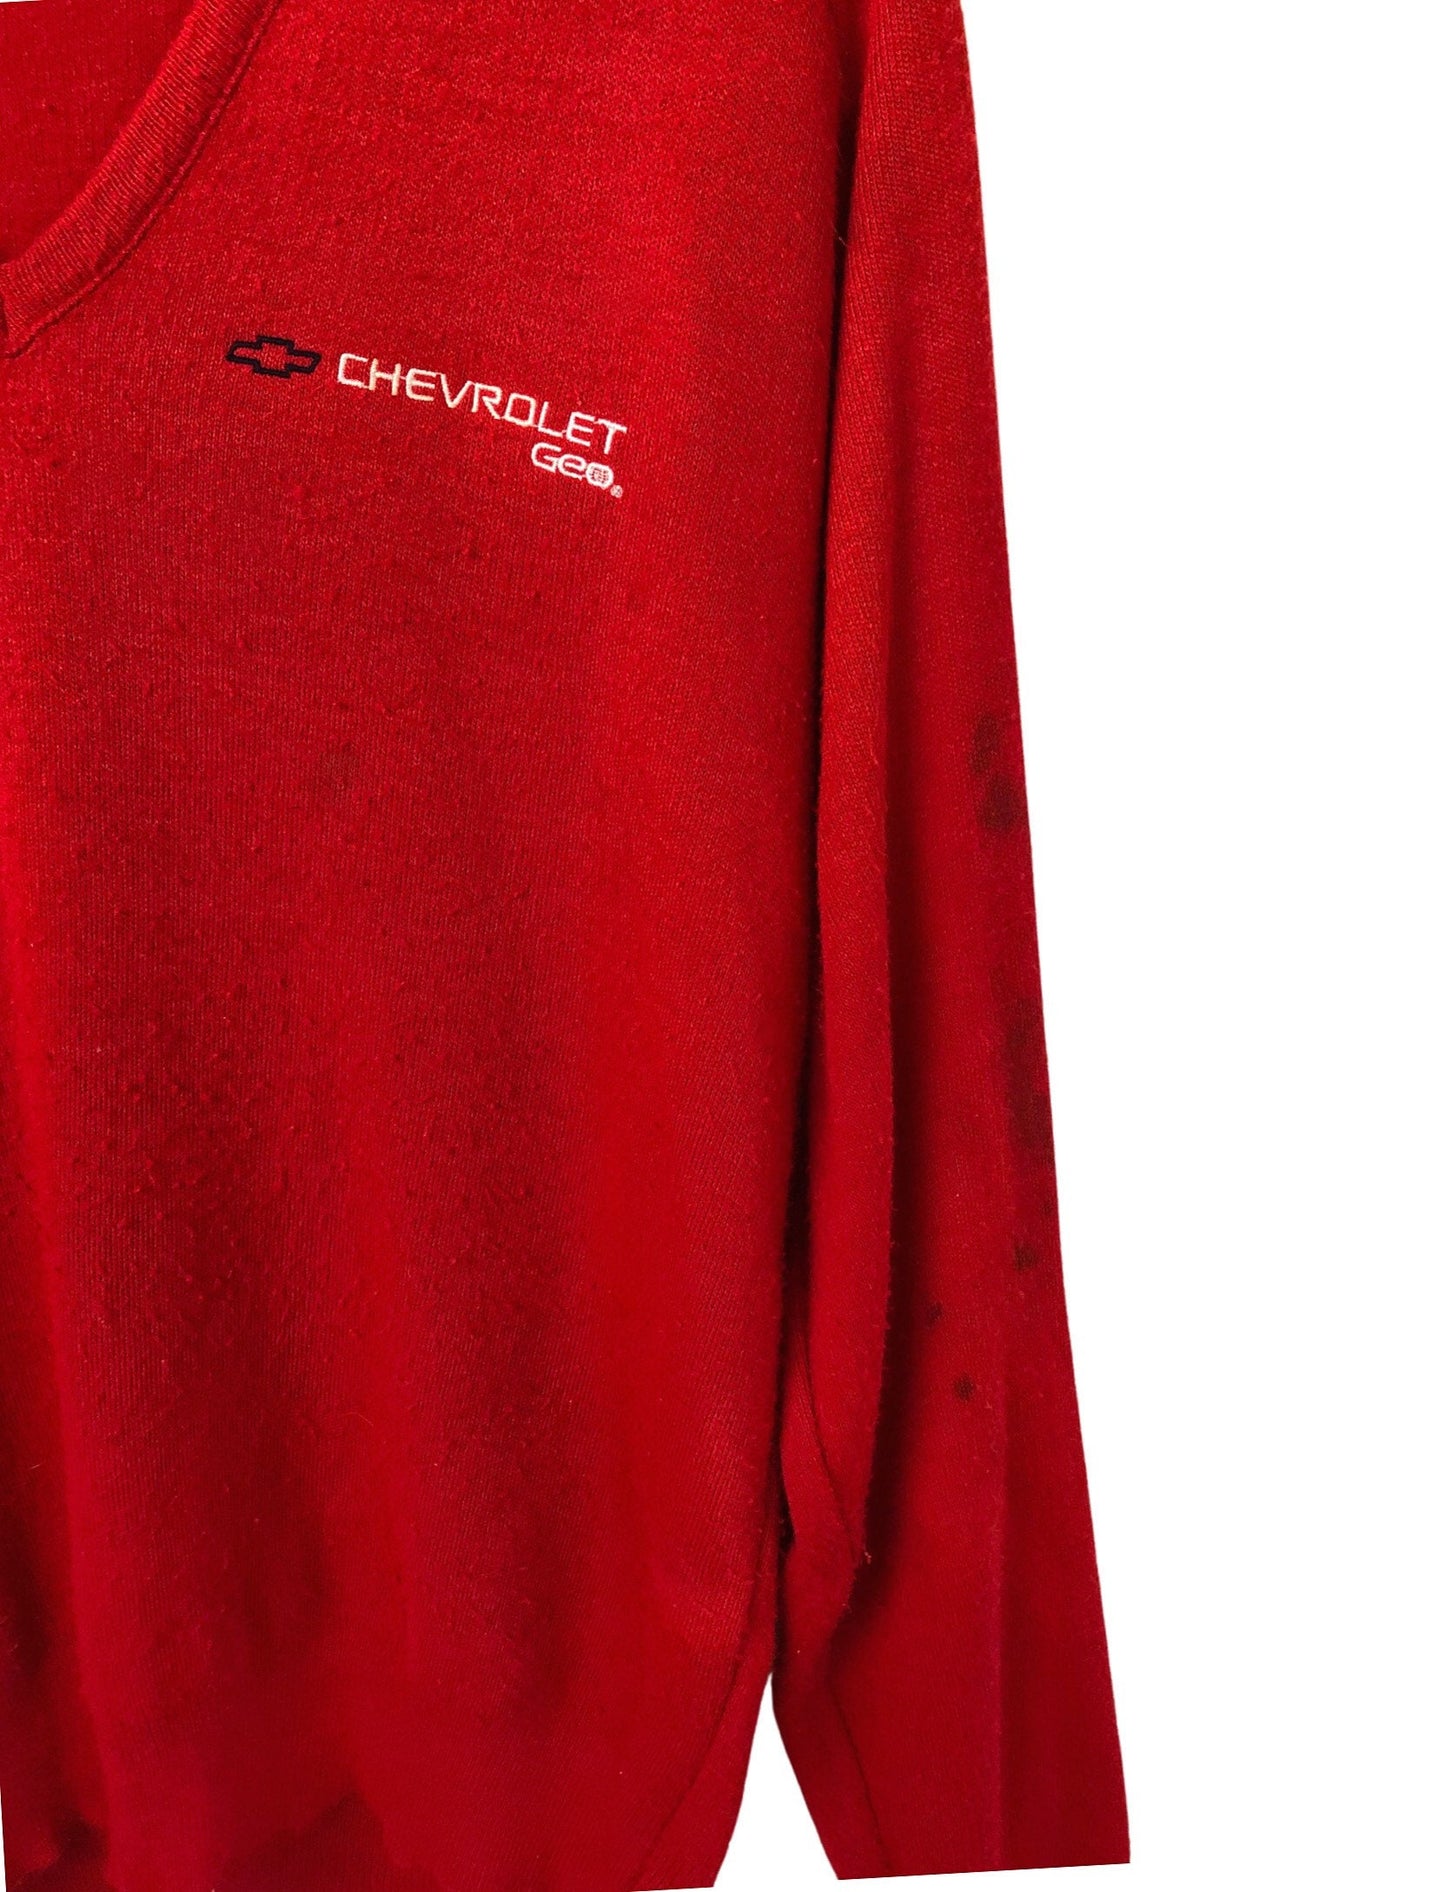 80’s Chevrolet Geo Embroidered Red Pine State V-Neck Sweater Size